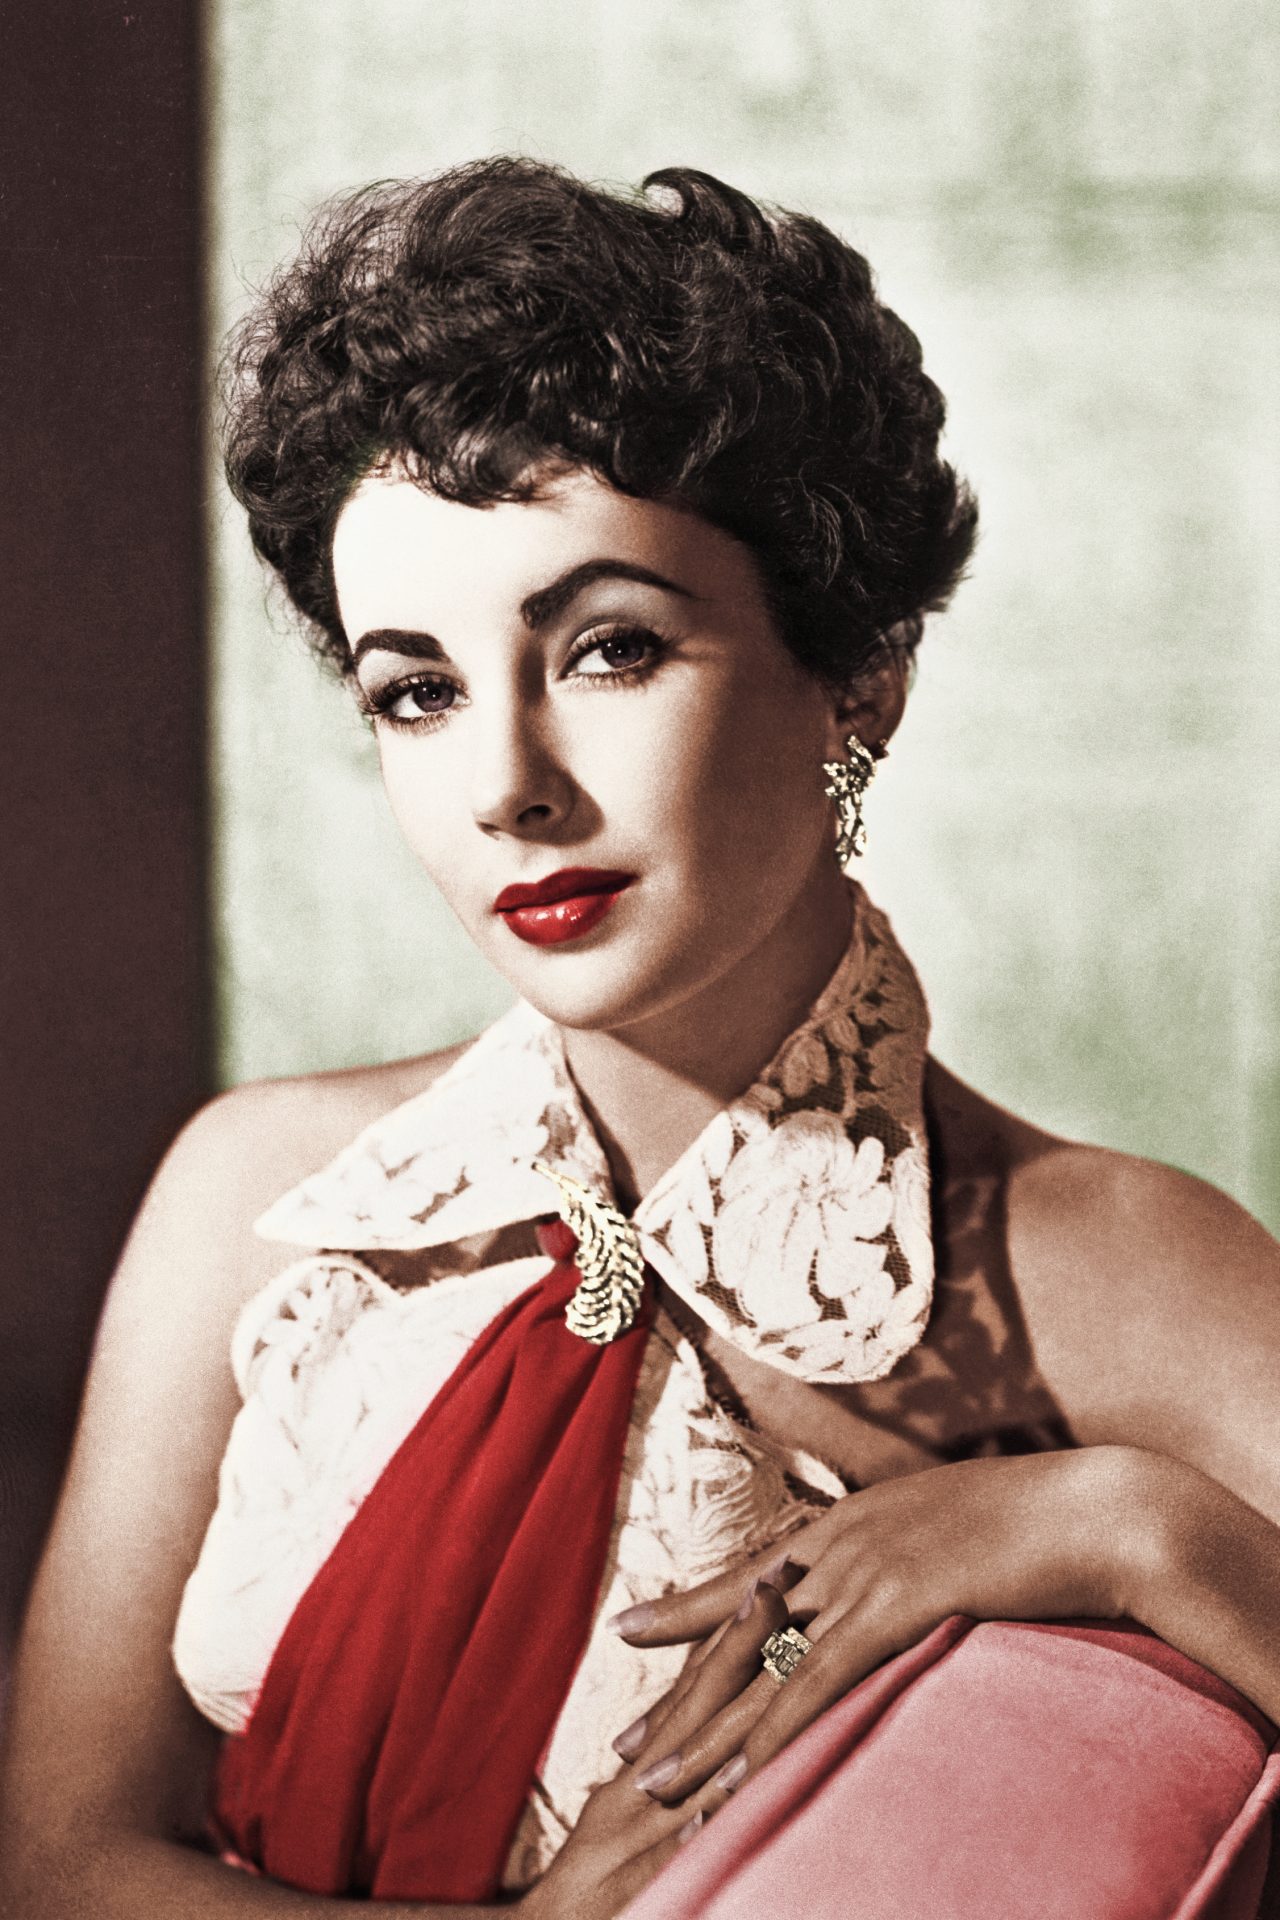 The production will be called 'Elizabeth Taylor: Rebel Superstar'.